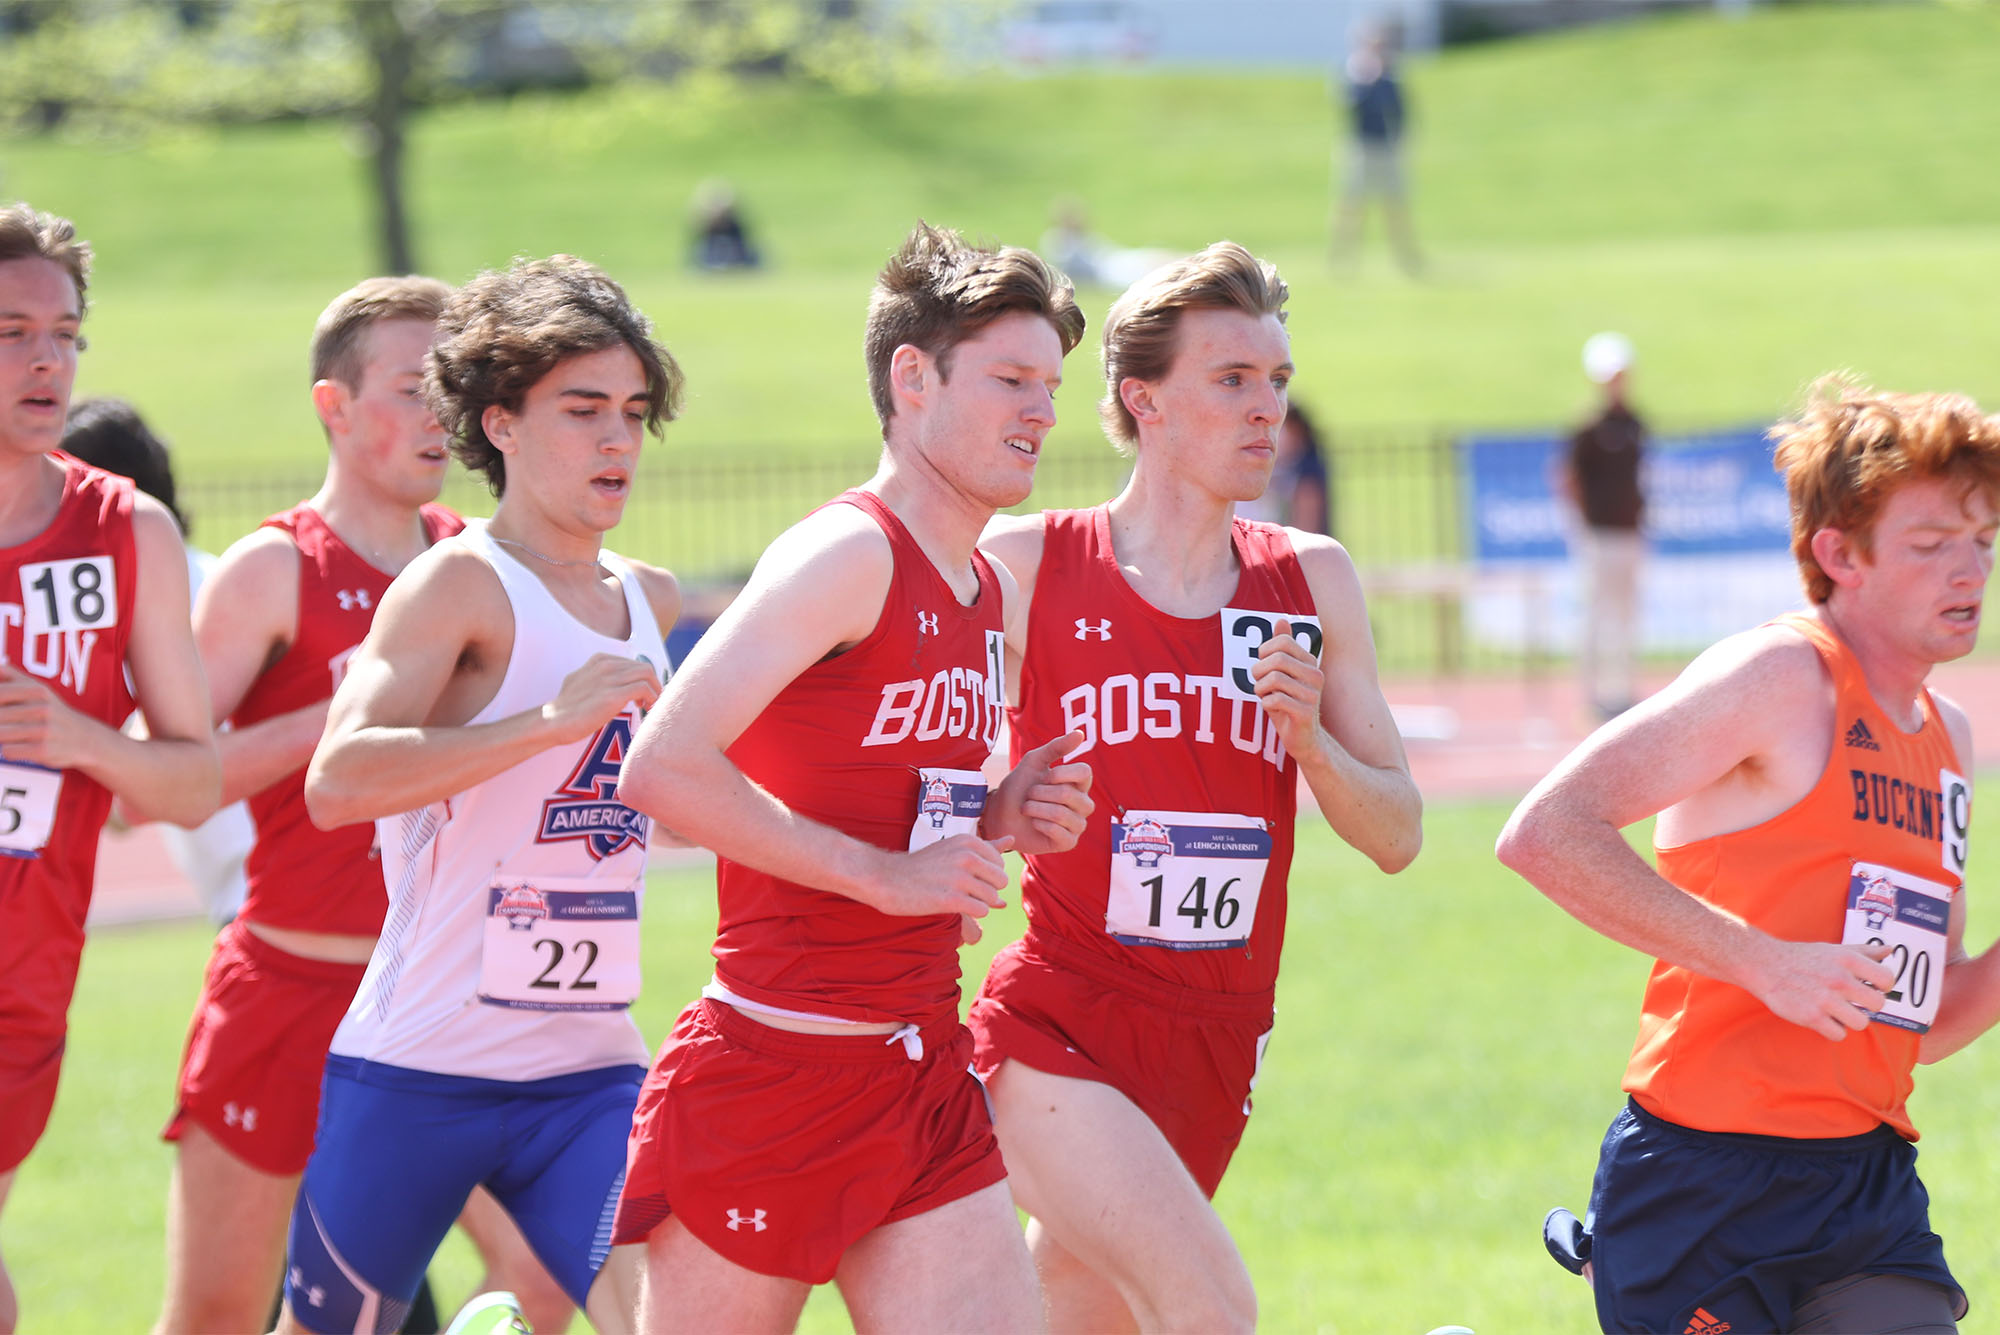 Photo: Kevin Murphy (QuestromG’24) runs in the 2023 Outdoor Patriot League Championship at Lehigh University’s Goodman Track and Field Complex in Bethlehem, Pa., alongside Mike Hagen